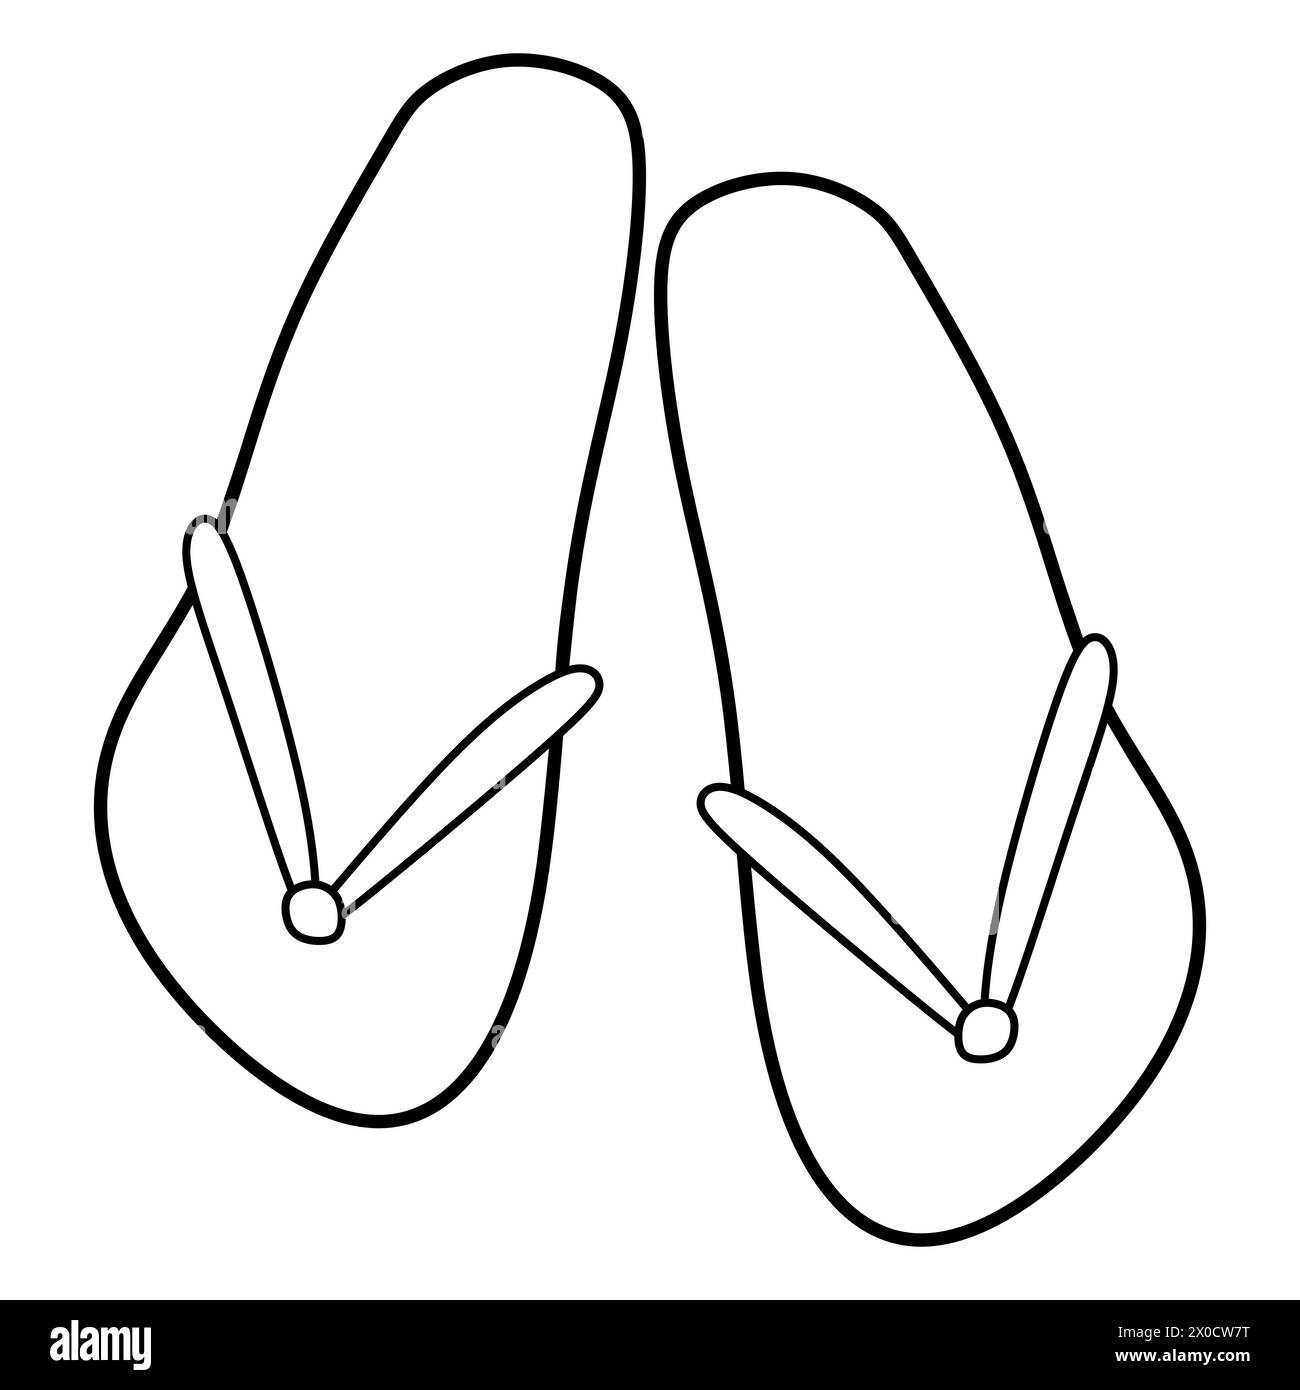 Doodle of flip-flops isolated on white background. Hand drawn vector illustration of beach shoes. Outline Black and White Flip flops, Beach Summer Foo Stock Vector